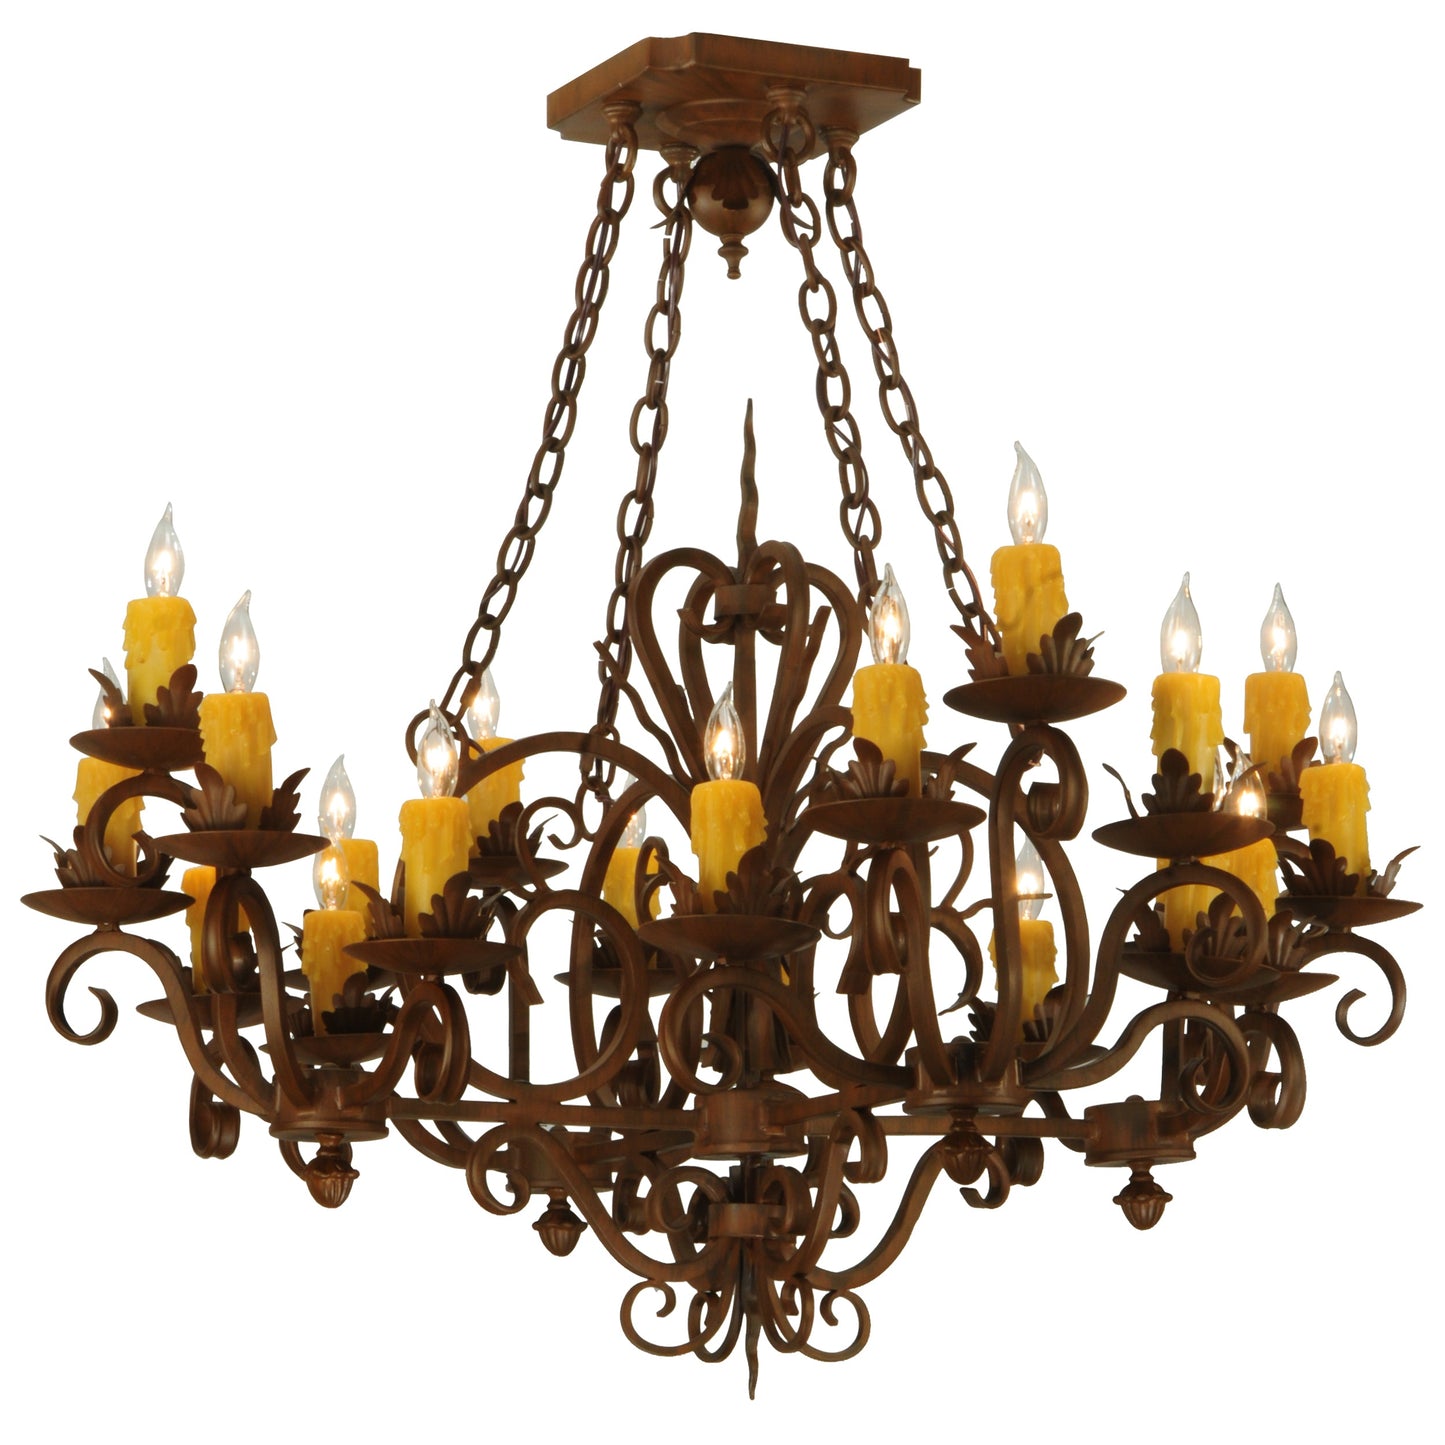 38" Square Kimberly 20-Light Chandelier by 2nd Ave Lighting